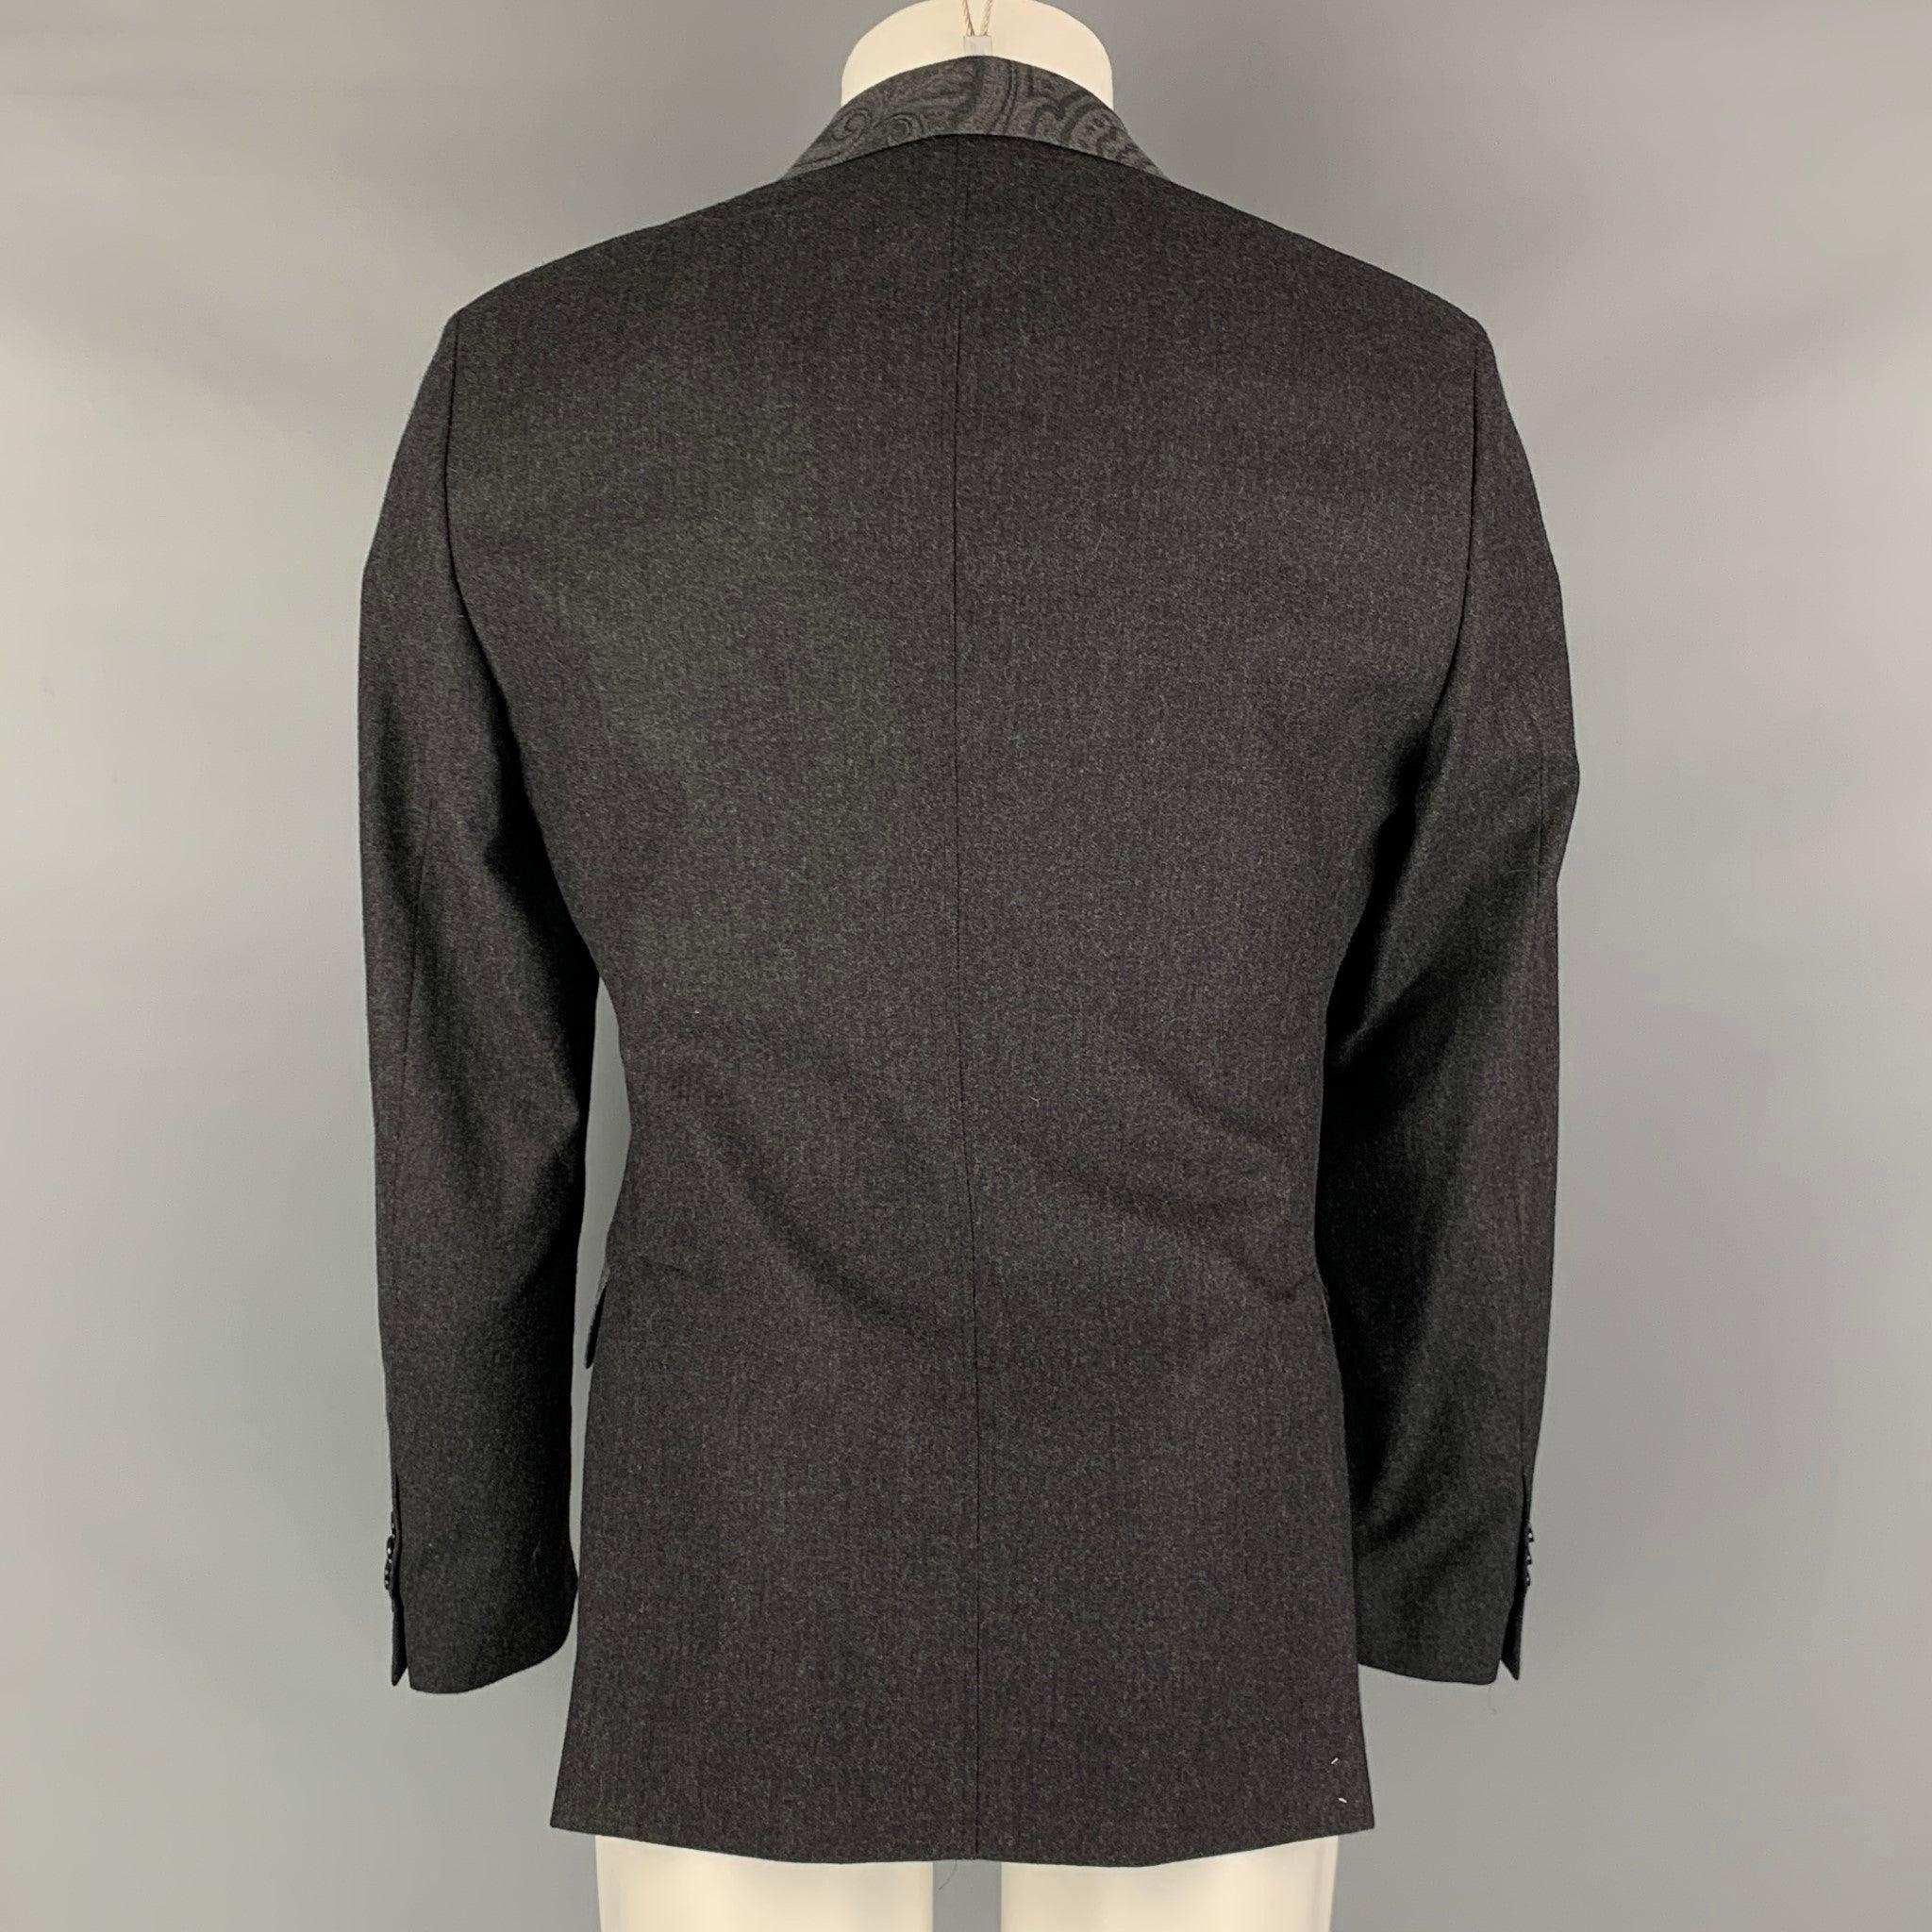 ETRO Size 38 Charcoal Mixed Fabrics Wool Blend Notch Lapel Sport Coat In Excellent Condition For Sale In San Francisco, CA